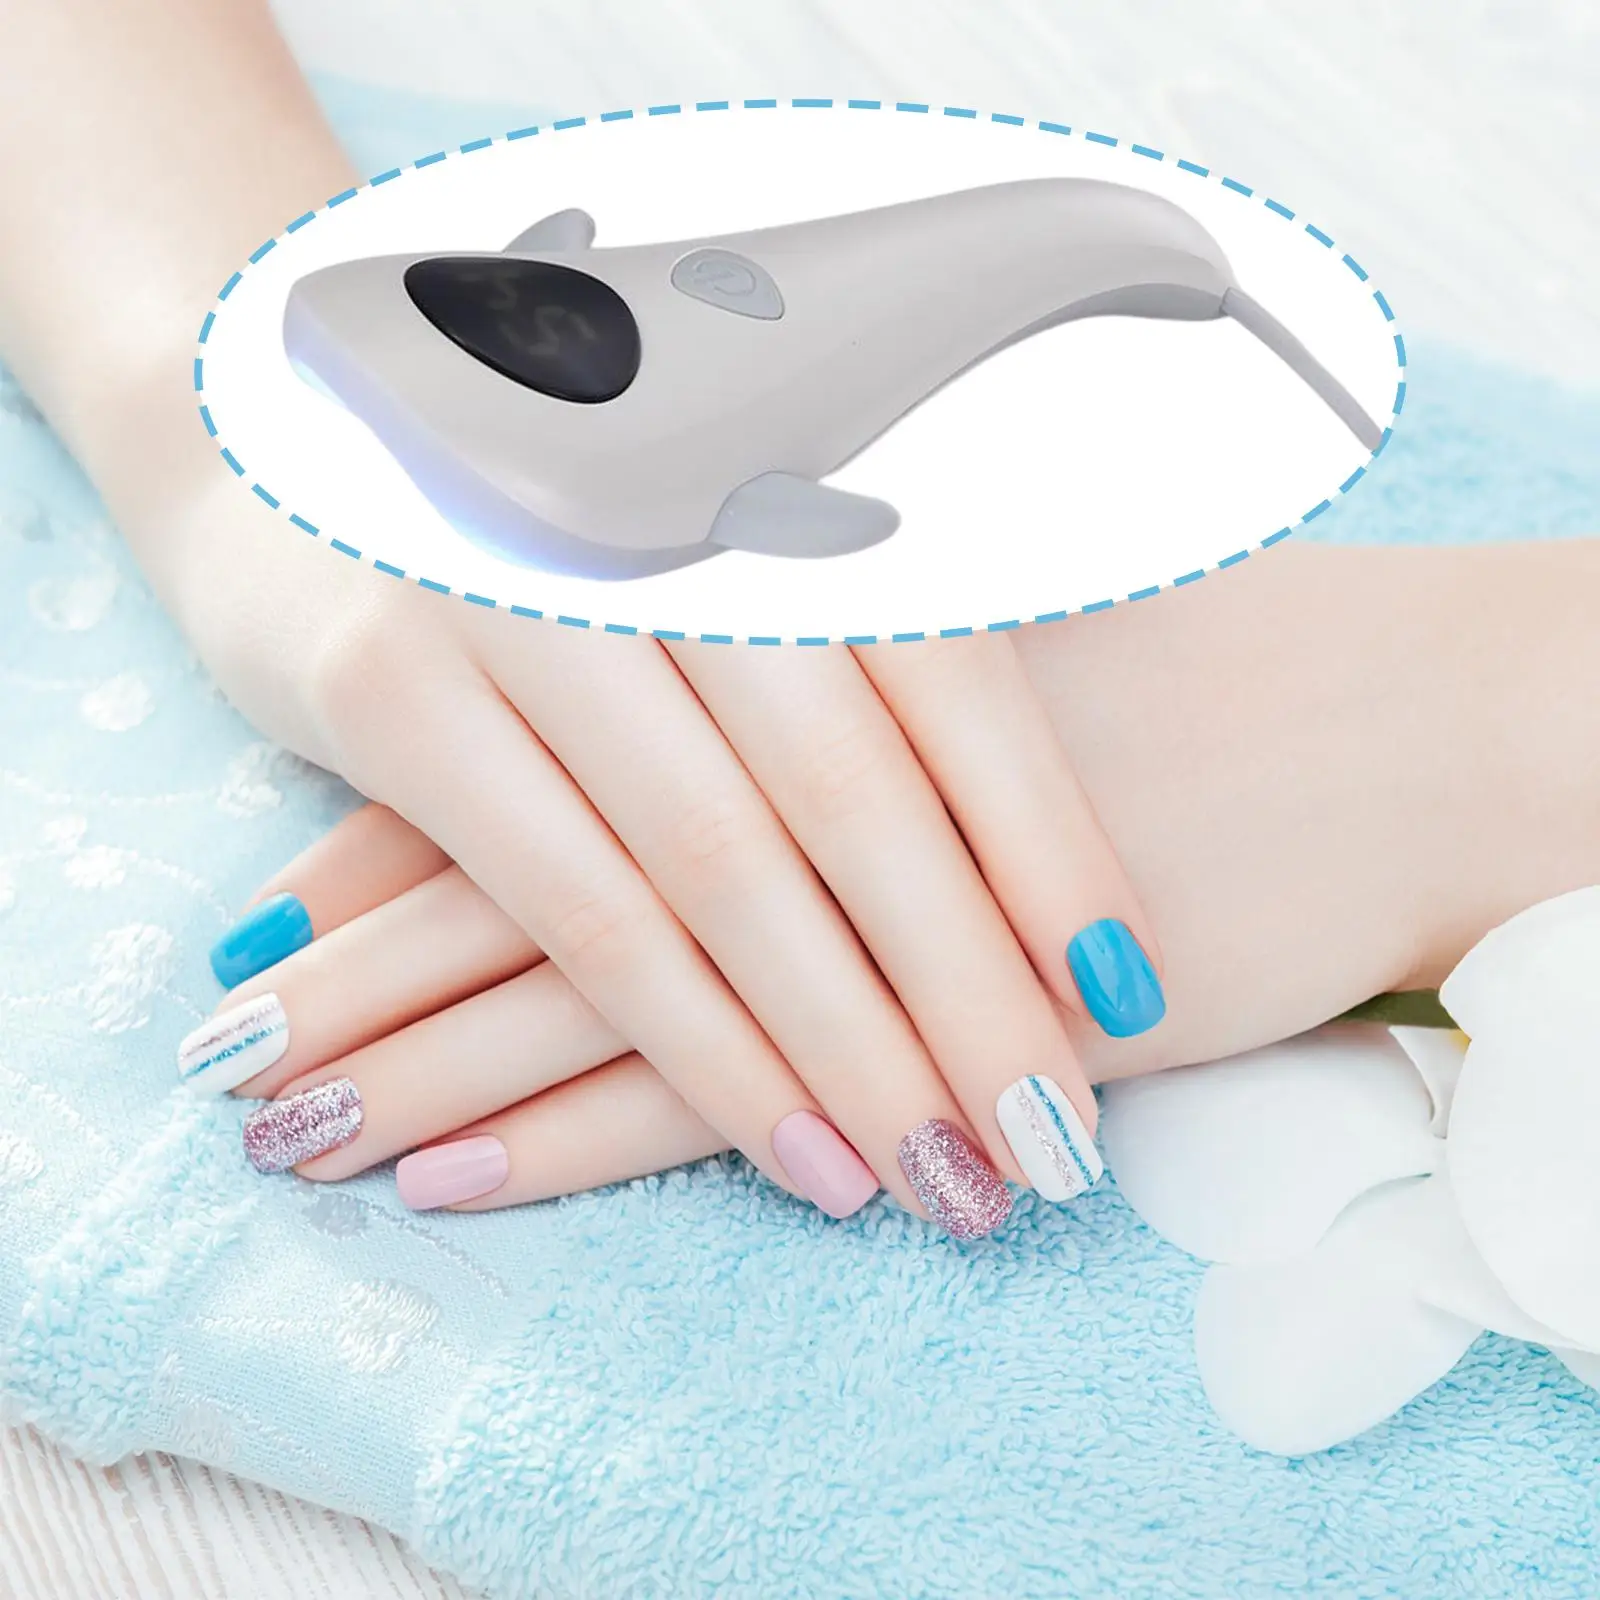 Professional Nail Lamp Nail Art Tools 5W Use C Salon and Home Use with 2 Timer Setting Nail Dryer